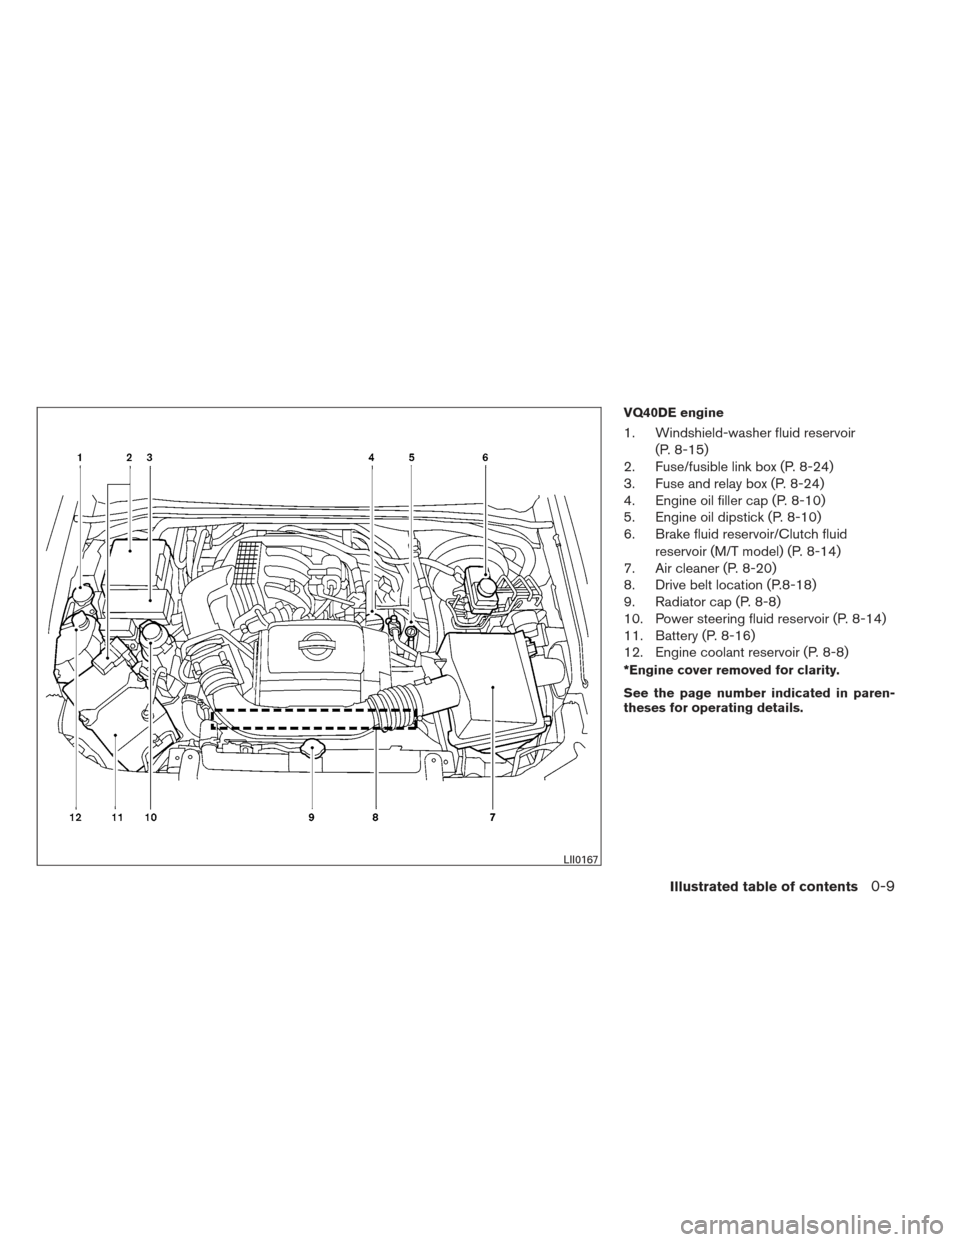 NISSAN FRONTIER 2013 D40 / 2.G Owners Manual VQ40DE engine
1. Windshield-washer fluid reservoir(P. 8-15)
2. Fuse/fusible link box (P. 8-24)
3. Fuse and relay box (P. 8-24)
4. Engine oil filler cap (P. 8-10)
5. Engine oil dipstick (P. 8-10)
6. Br